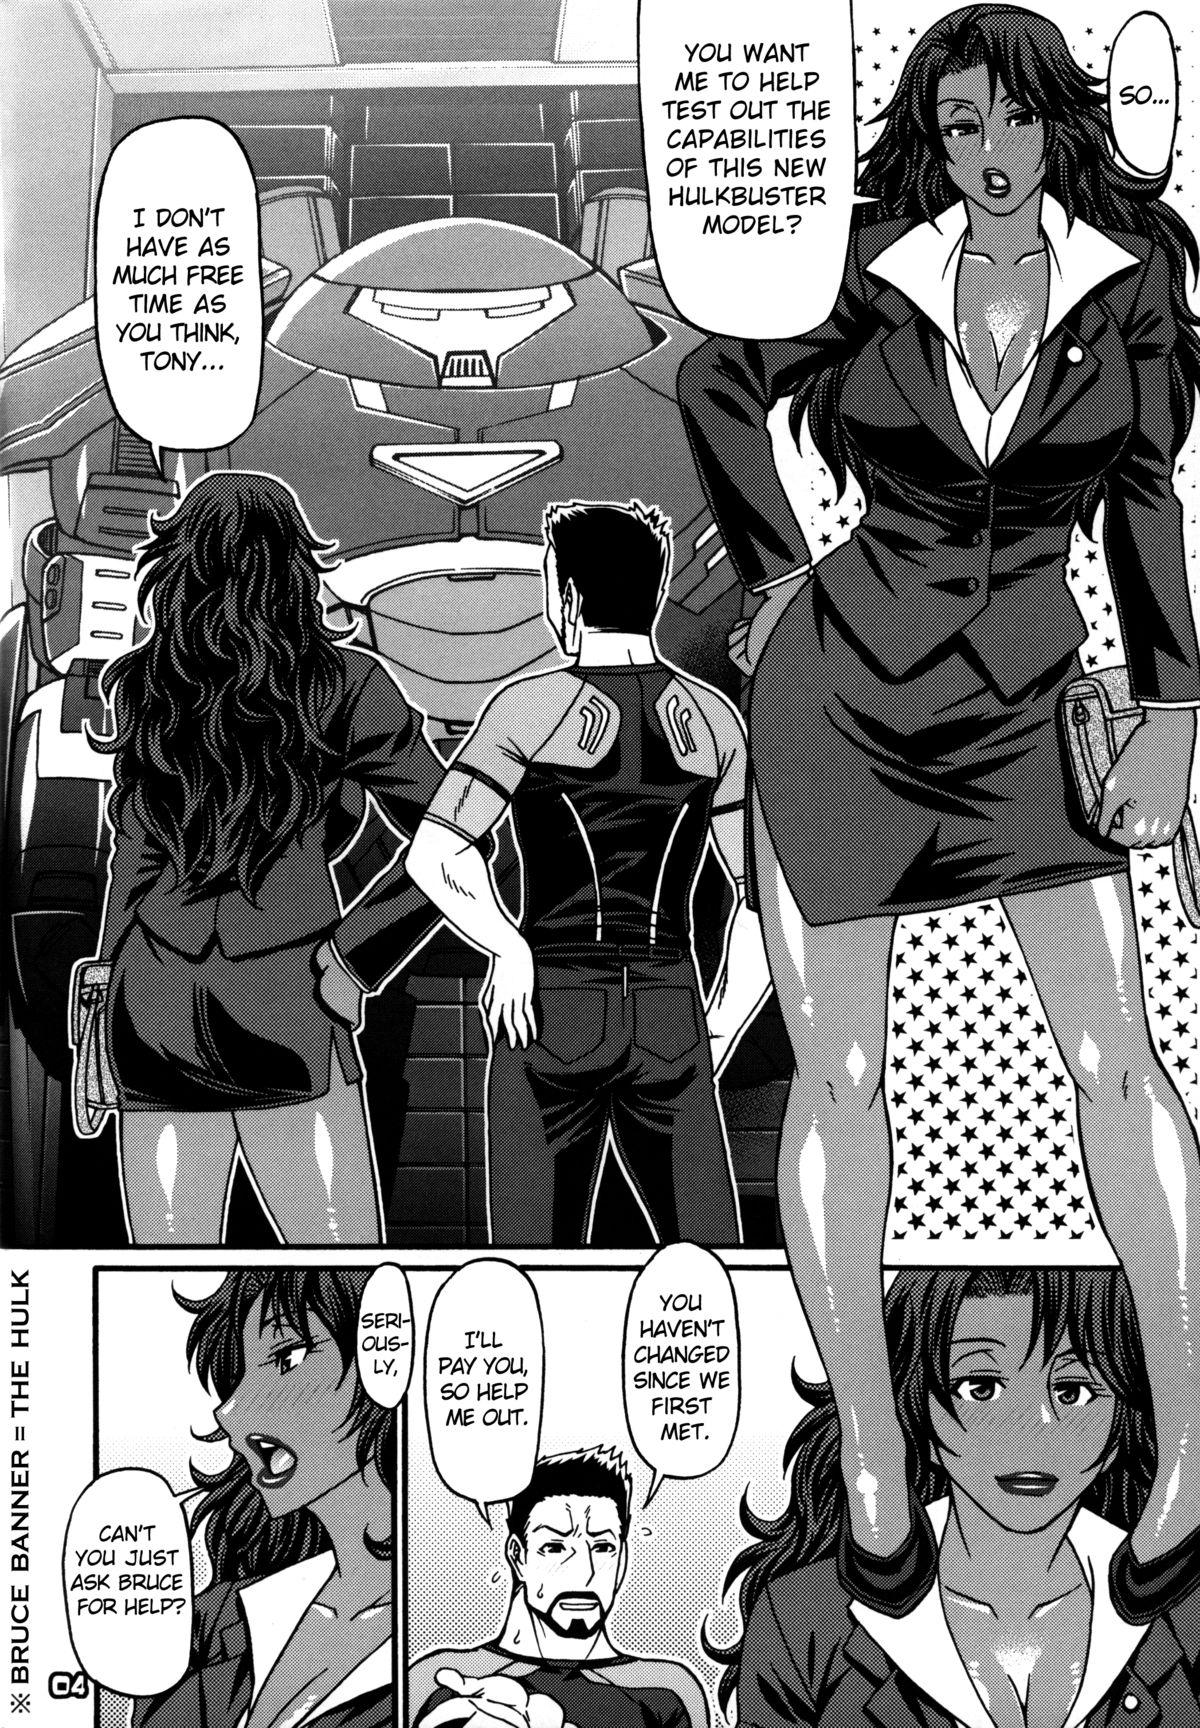 Best Blowjobs Ever What's Up Baby - Superman Iron man Step Sister - Page 4